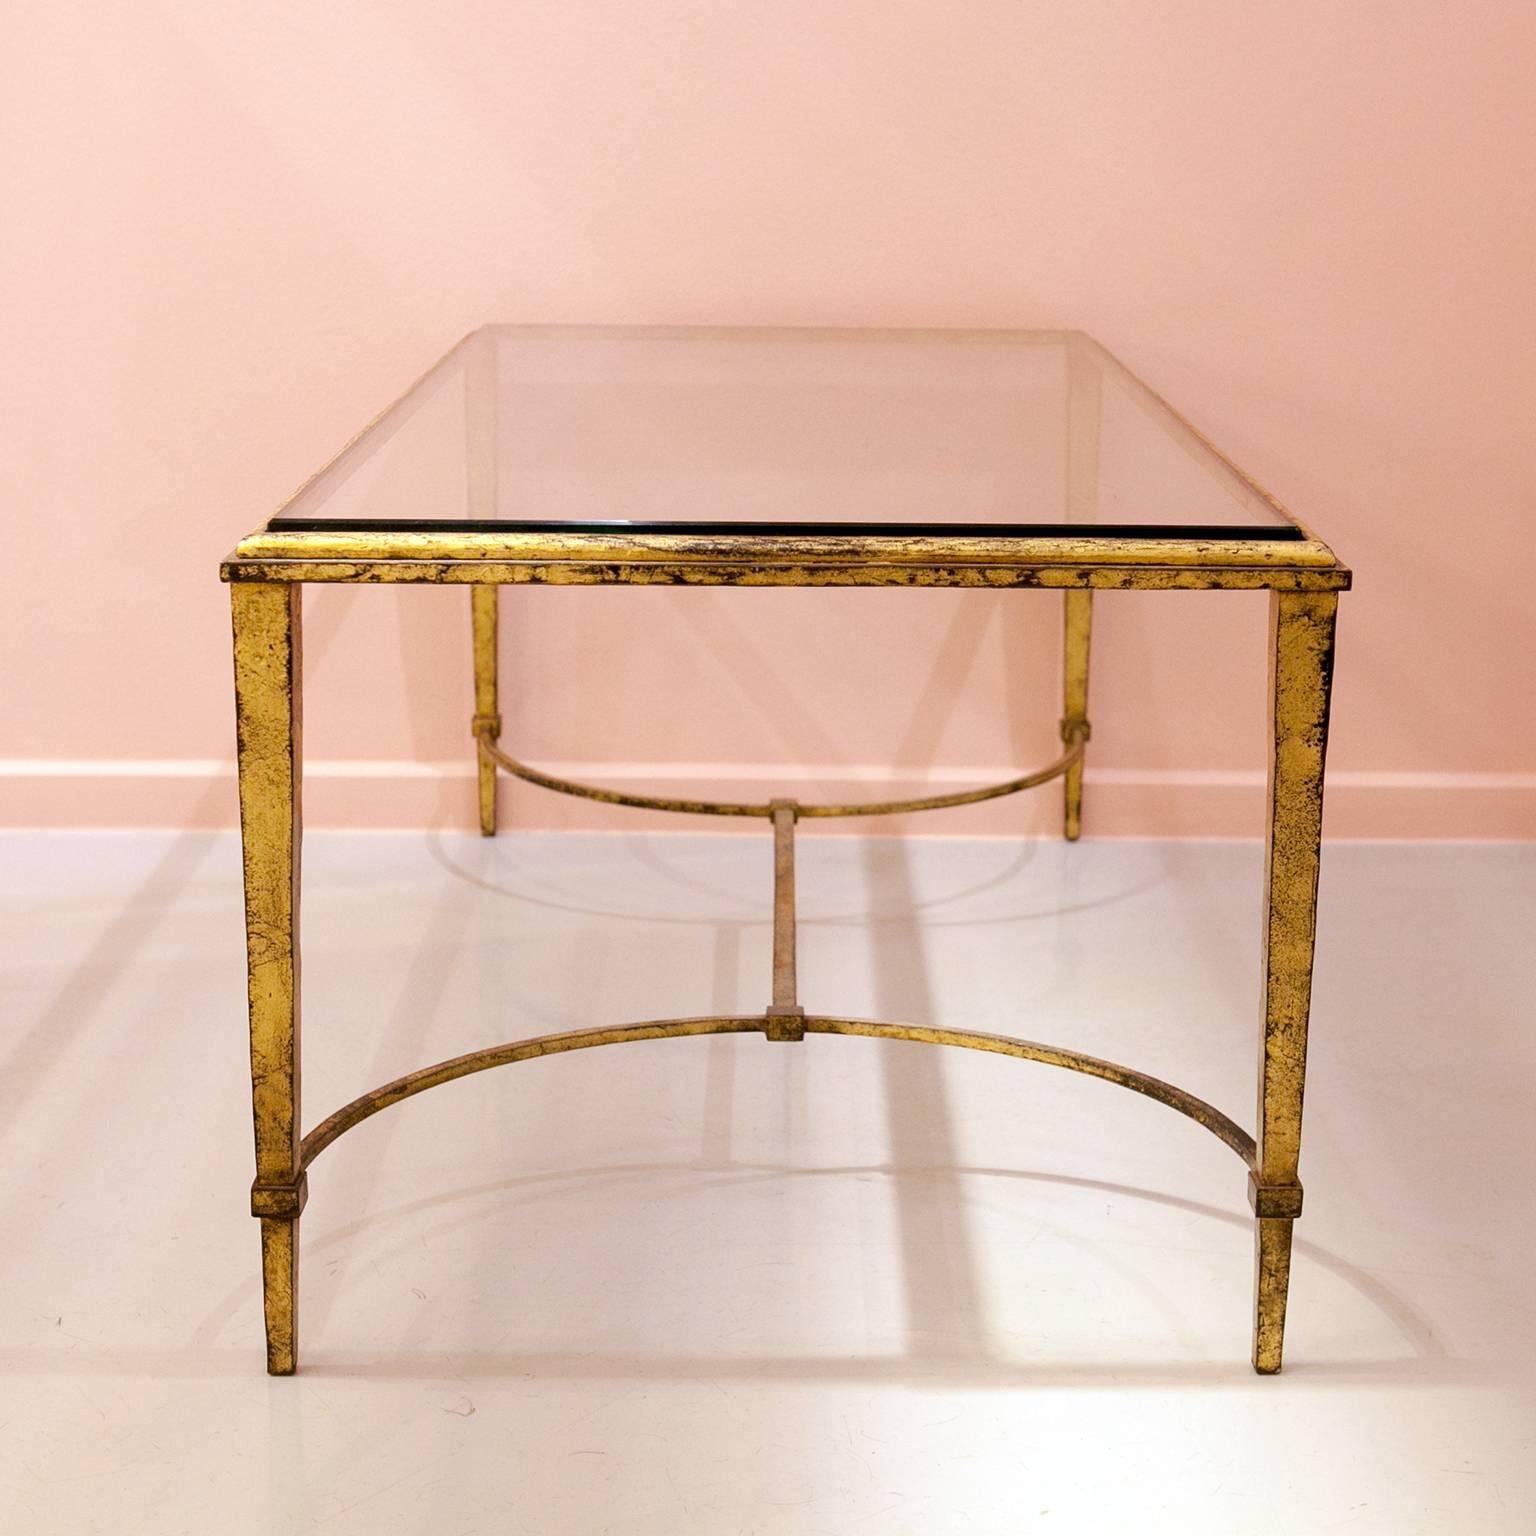 1940s Mid-Century Modern French Coffee Table by Maison Ramsay, Glass, Gold In Excellent Condition For Sale In Cologne, DE